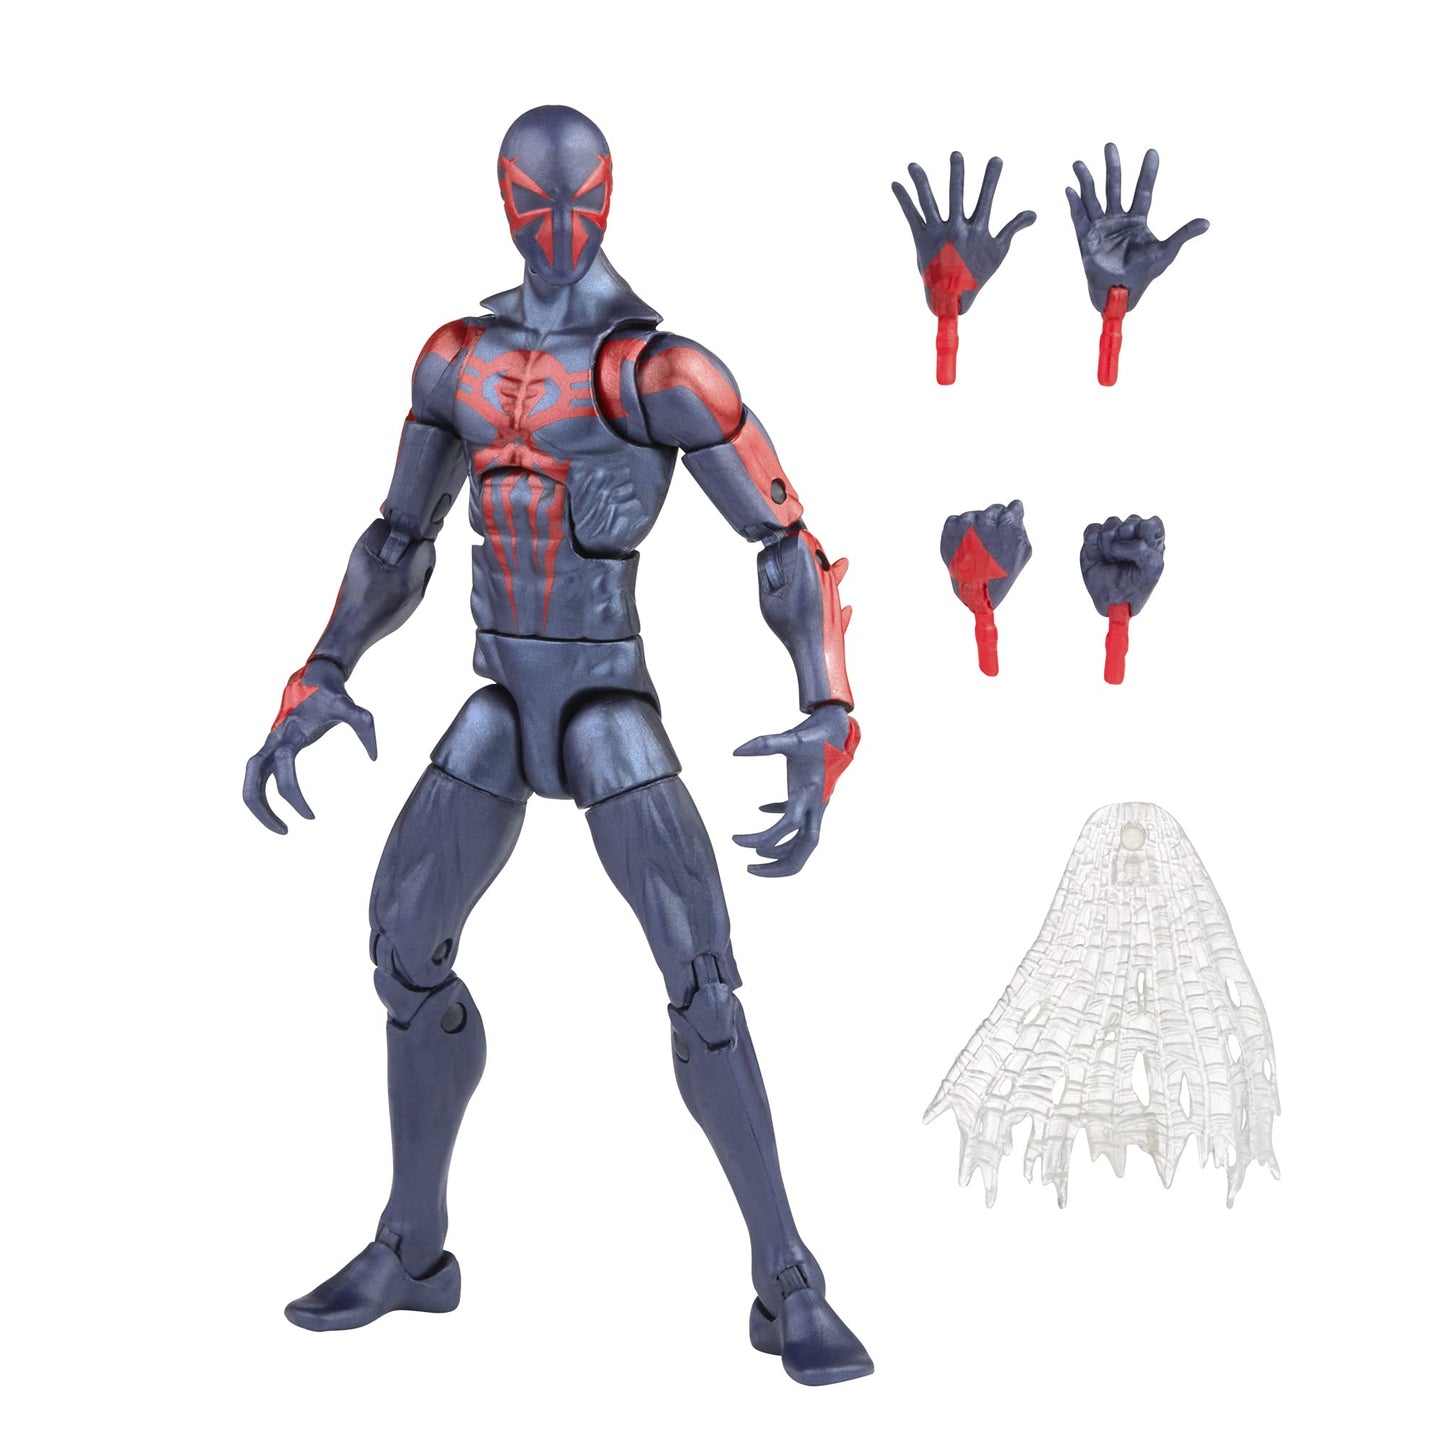 Hasbro Marvel Legends Series 6-inch Scale Action Figure Toy Spider-Man 2099, Premium Design, 1 Figure, and 2 Accessories